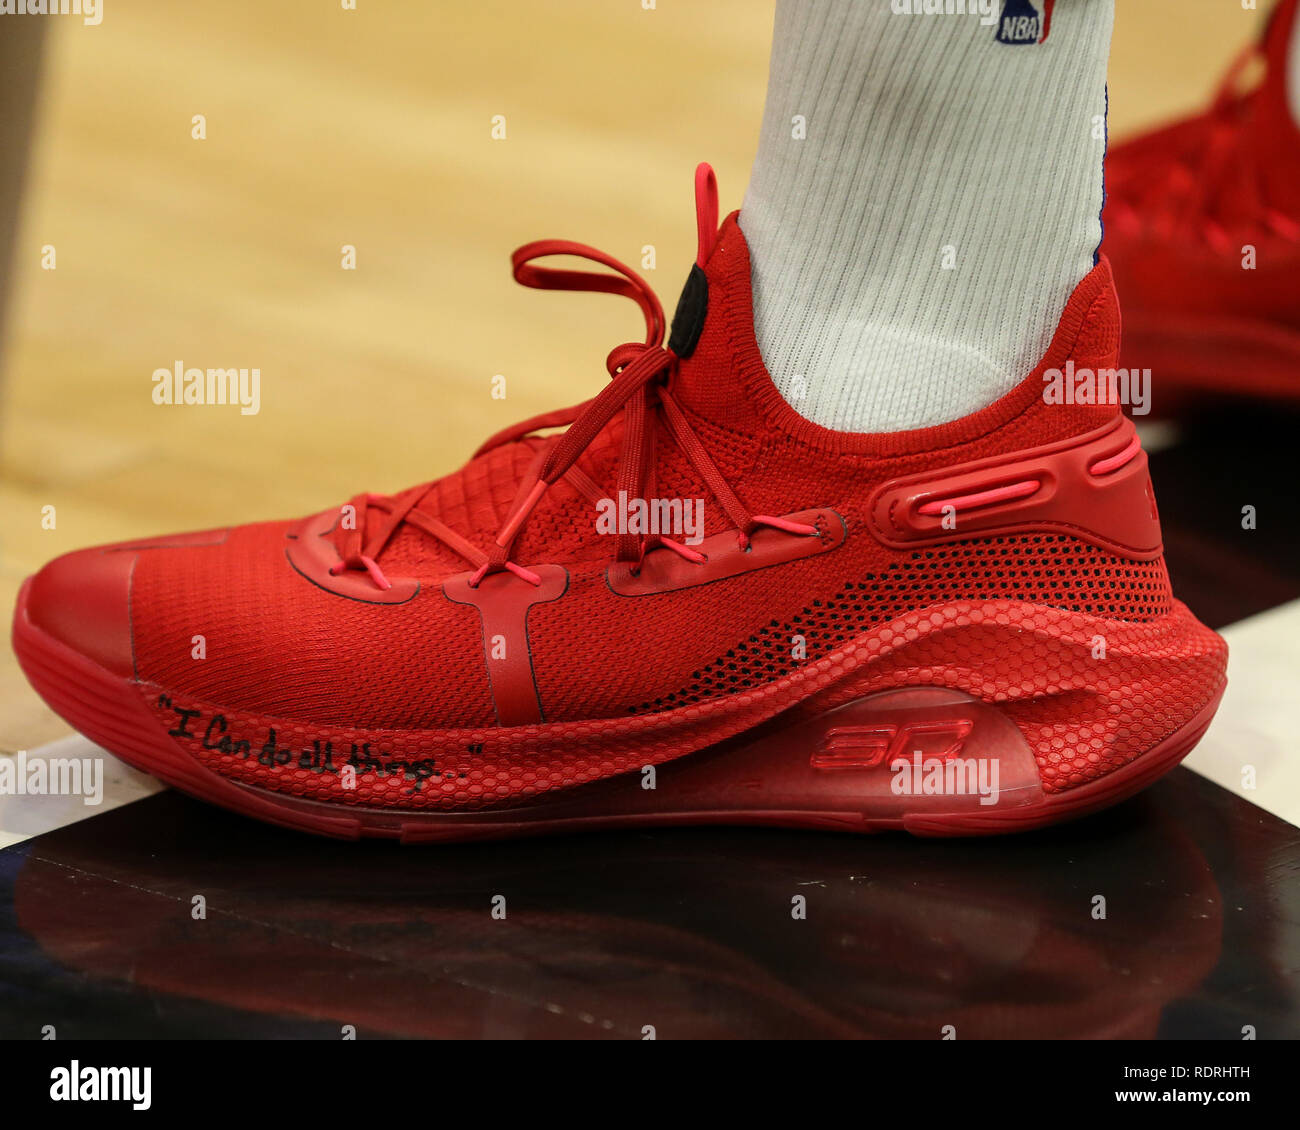 stephen curry shoes 2019